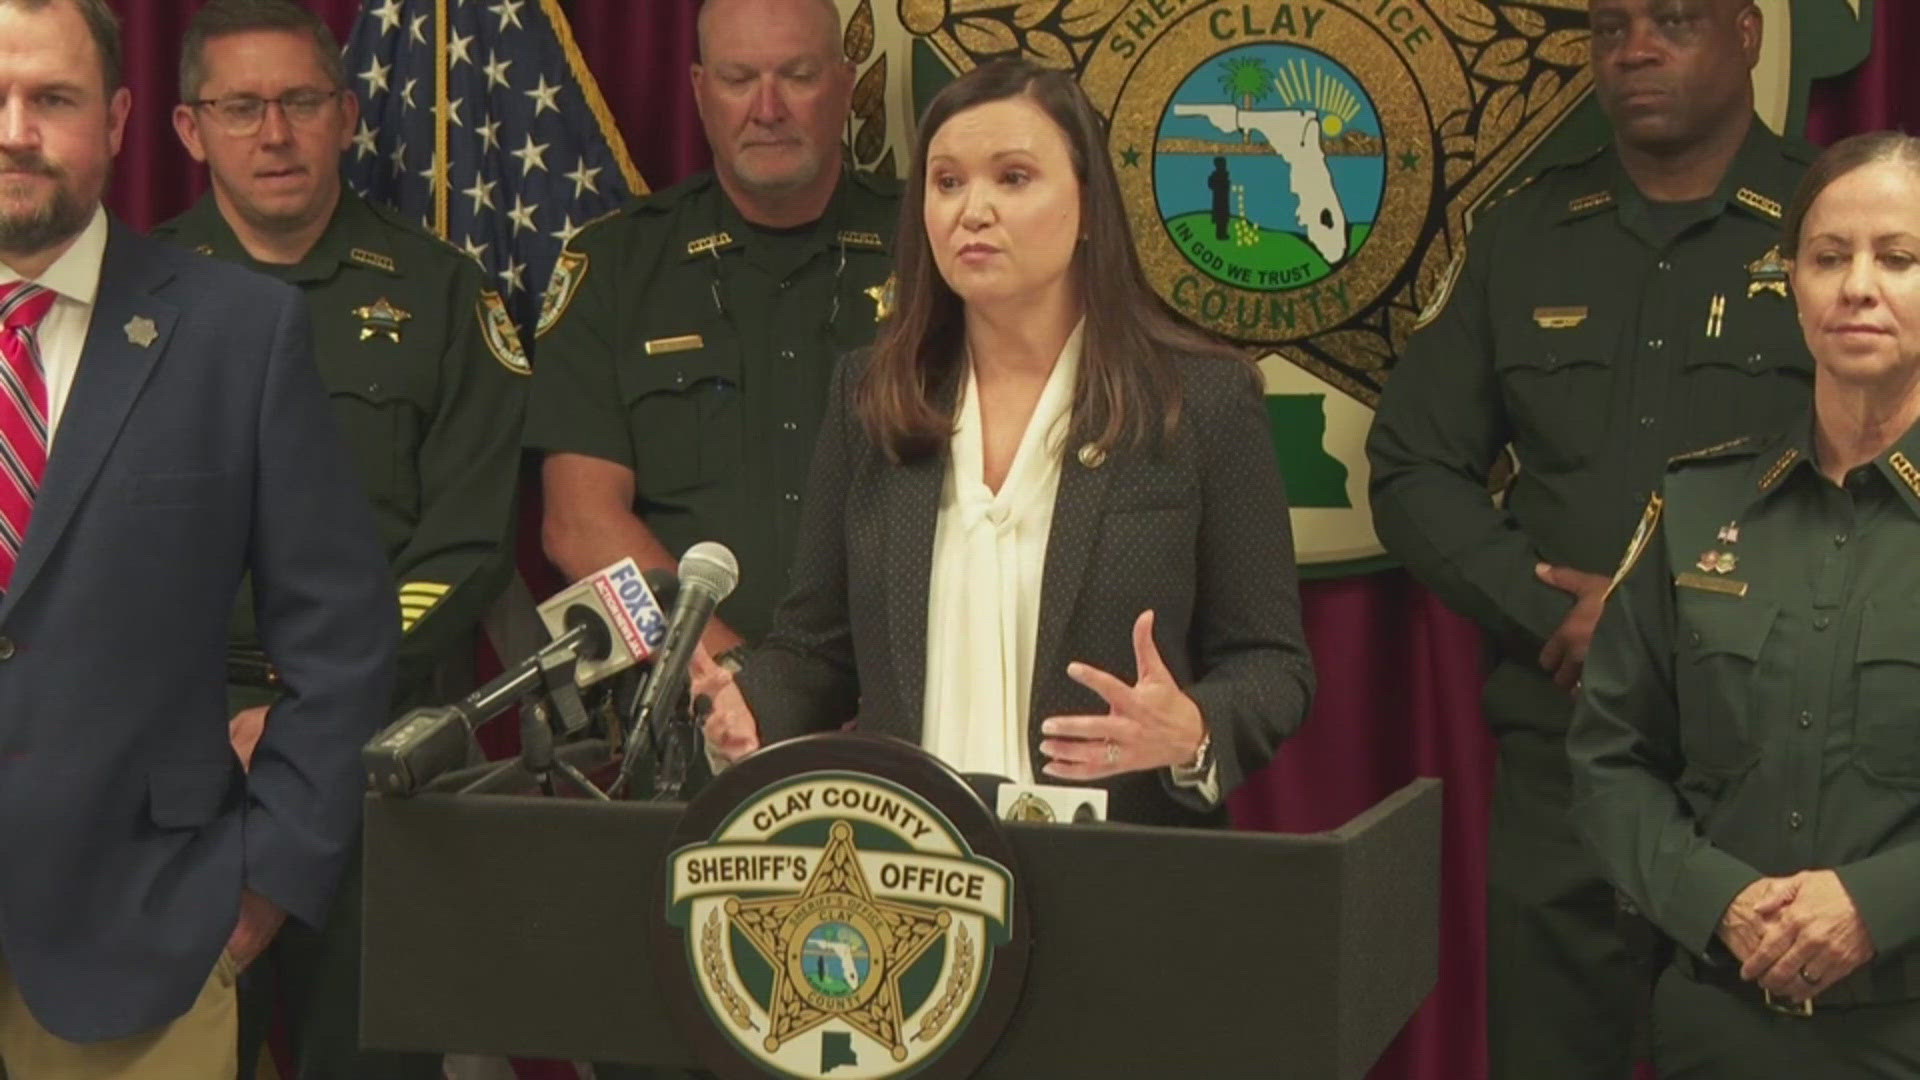 Attorney General Ashley Moody held a press conference alongside Clay County Sheriff Michelle Cook on Tuesday.